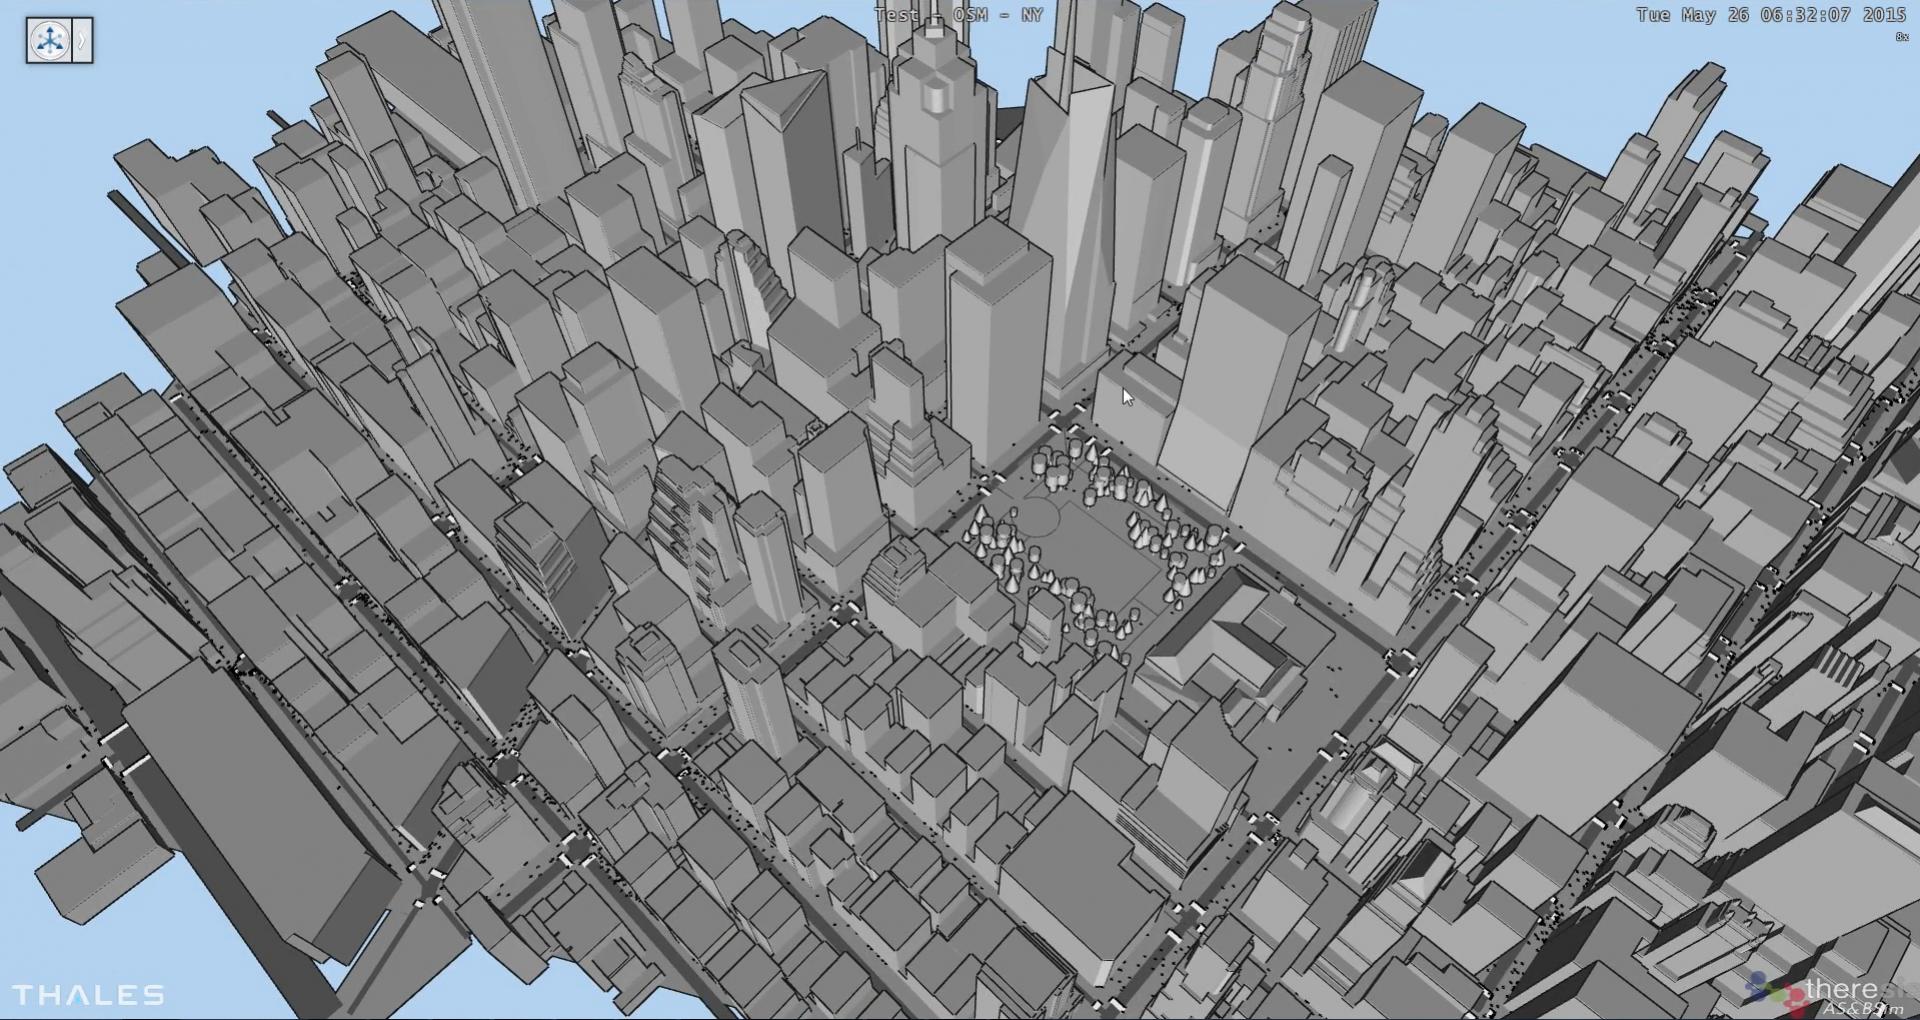 New York - automatic simulation generation from OSM